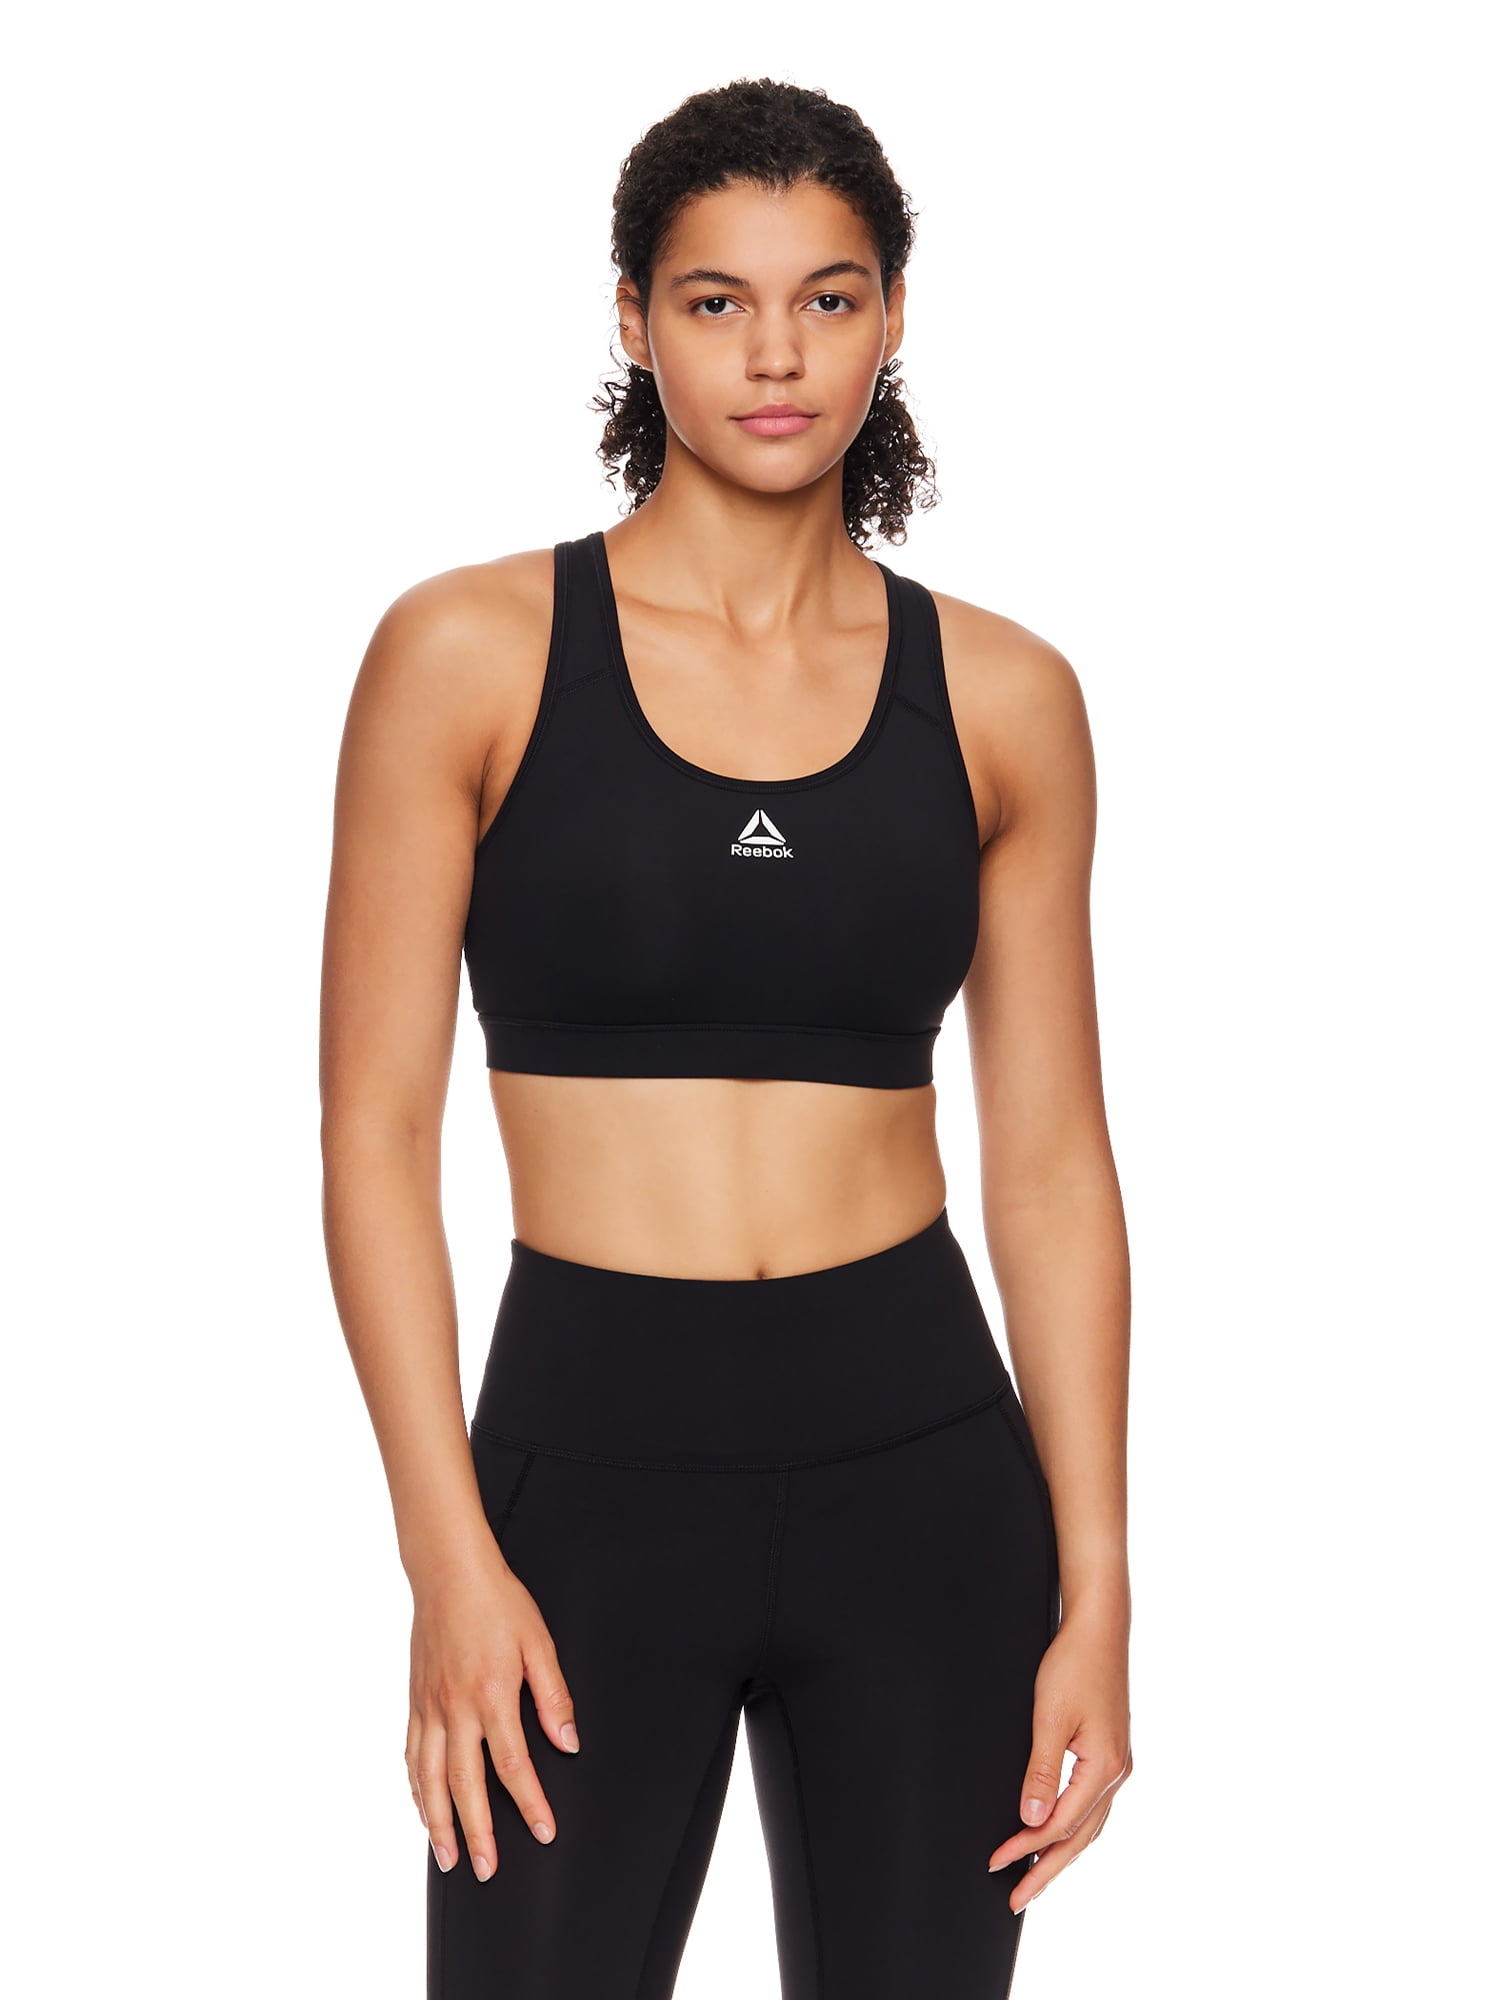 Champion Women's N9587 Duo Dry High Support Active Wear Sports Bra